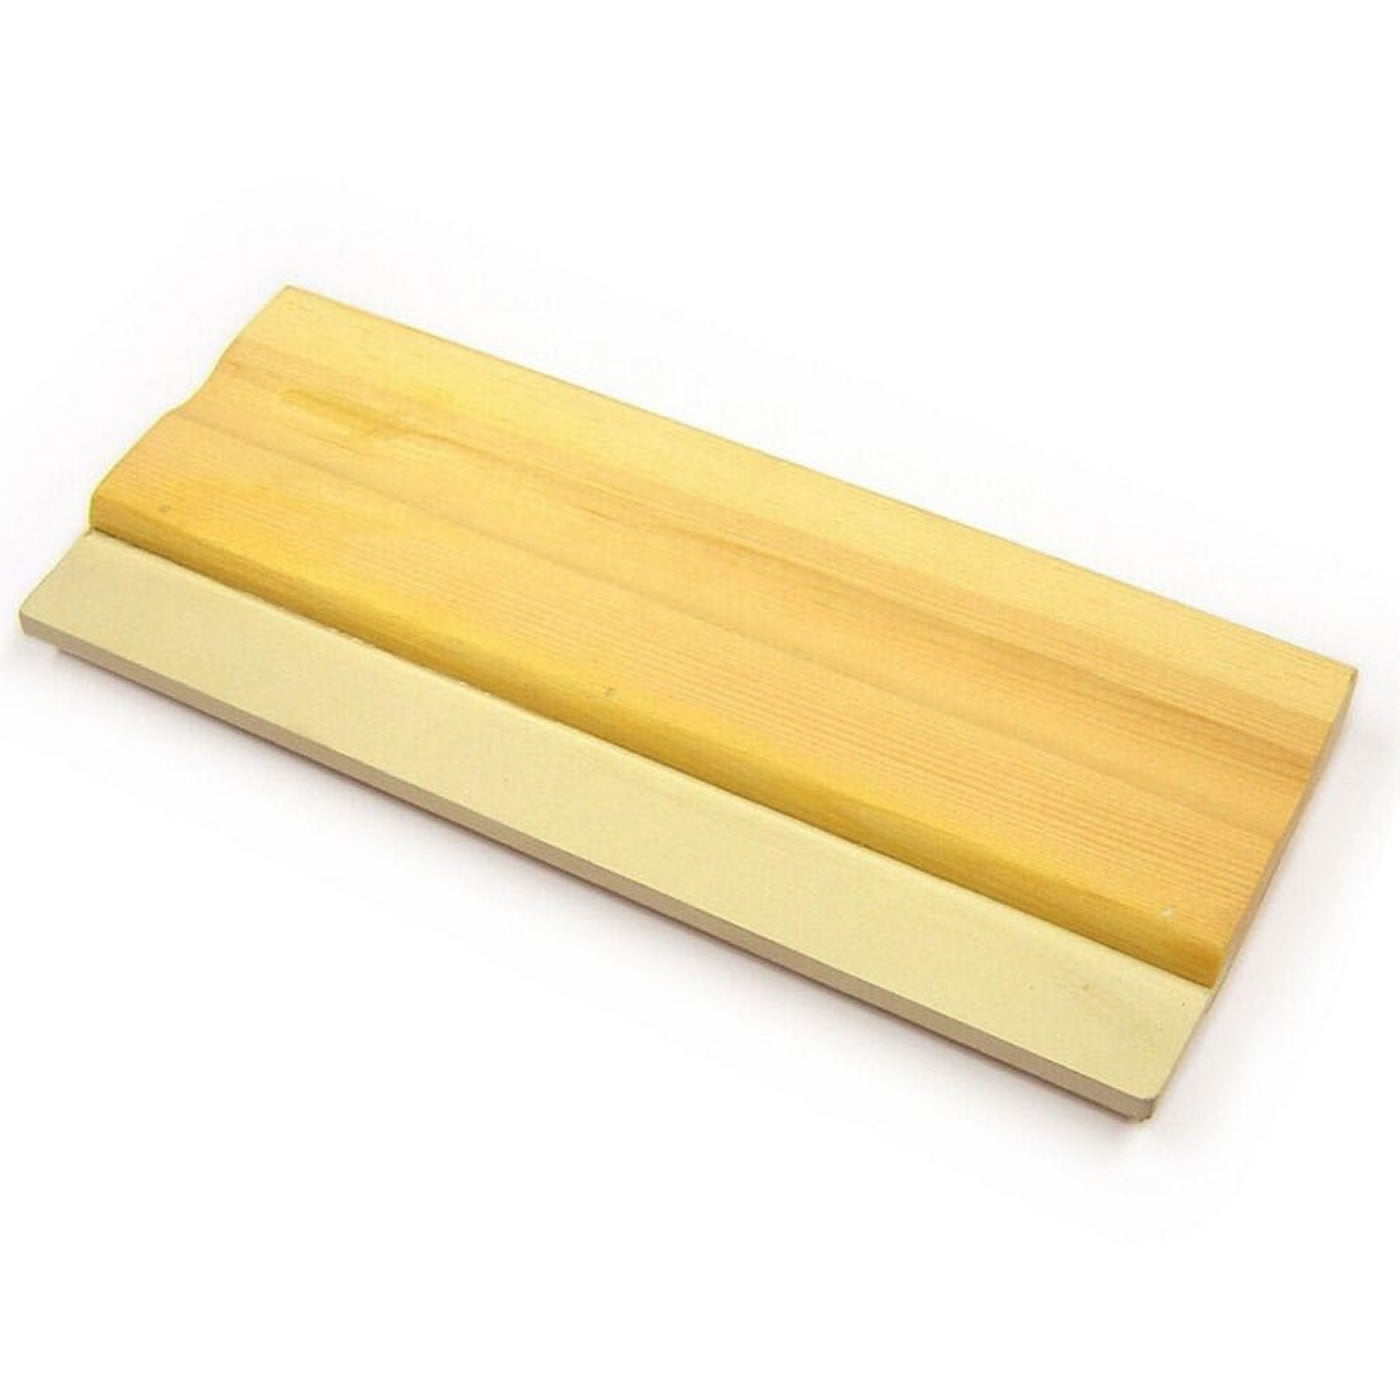 wooden squeegee with rubber blade